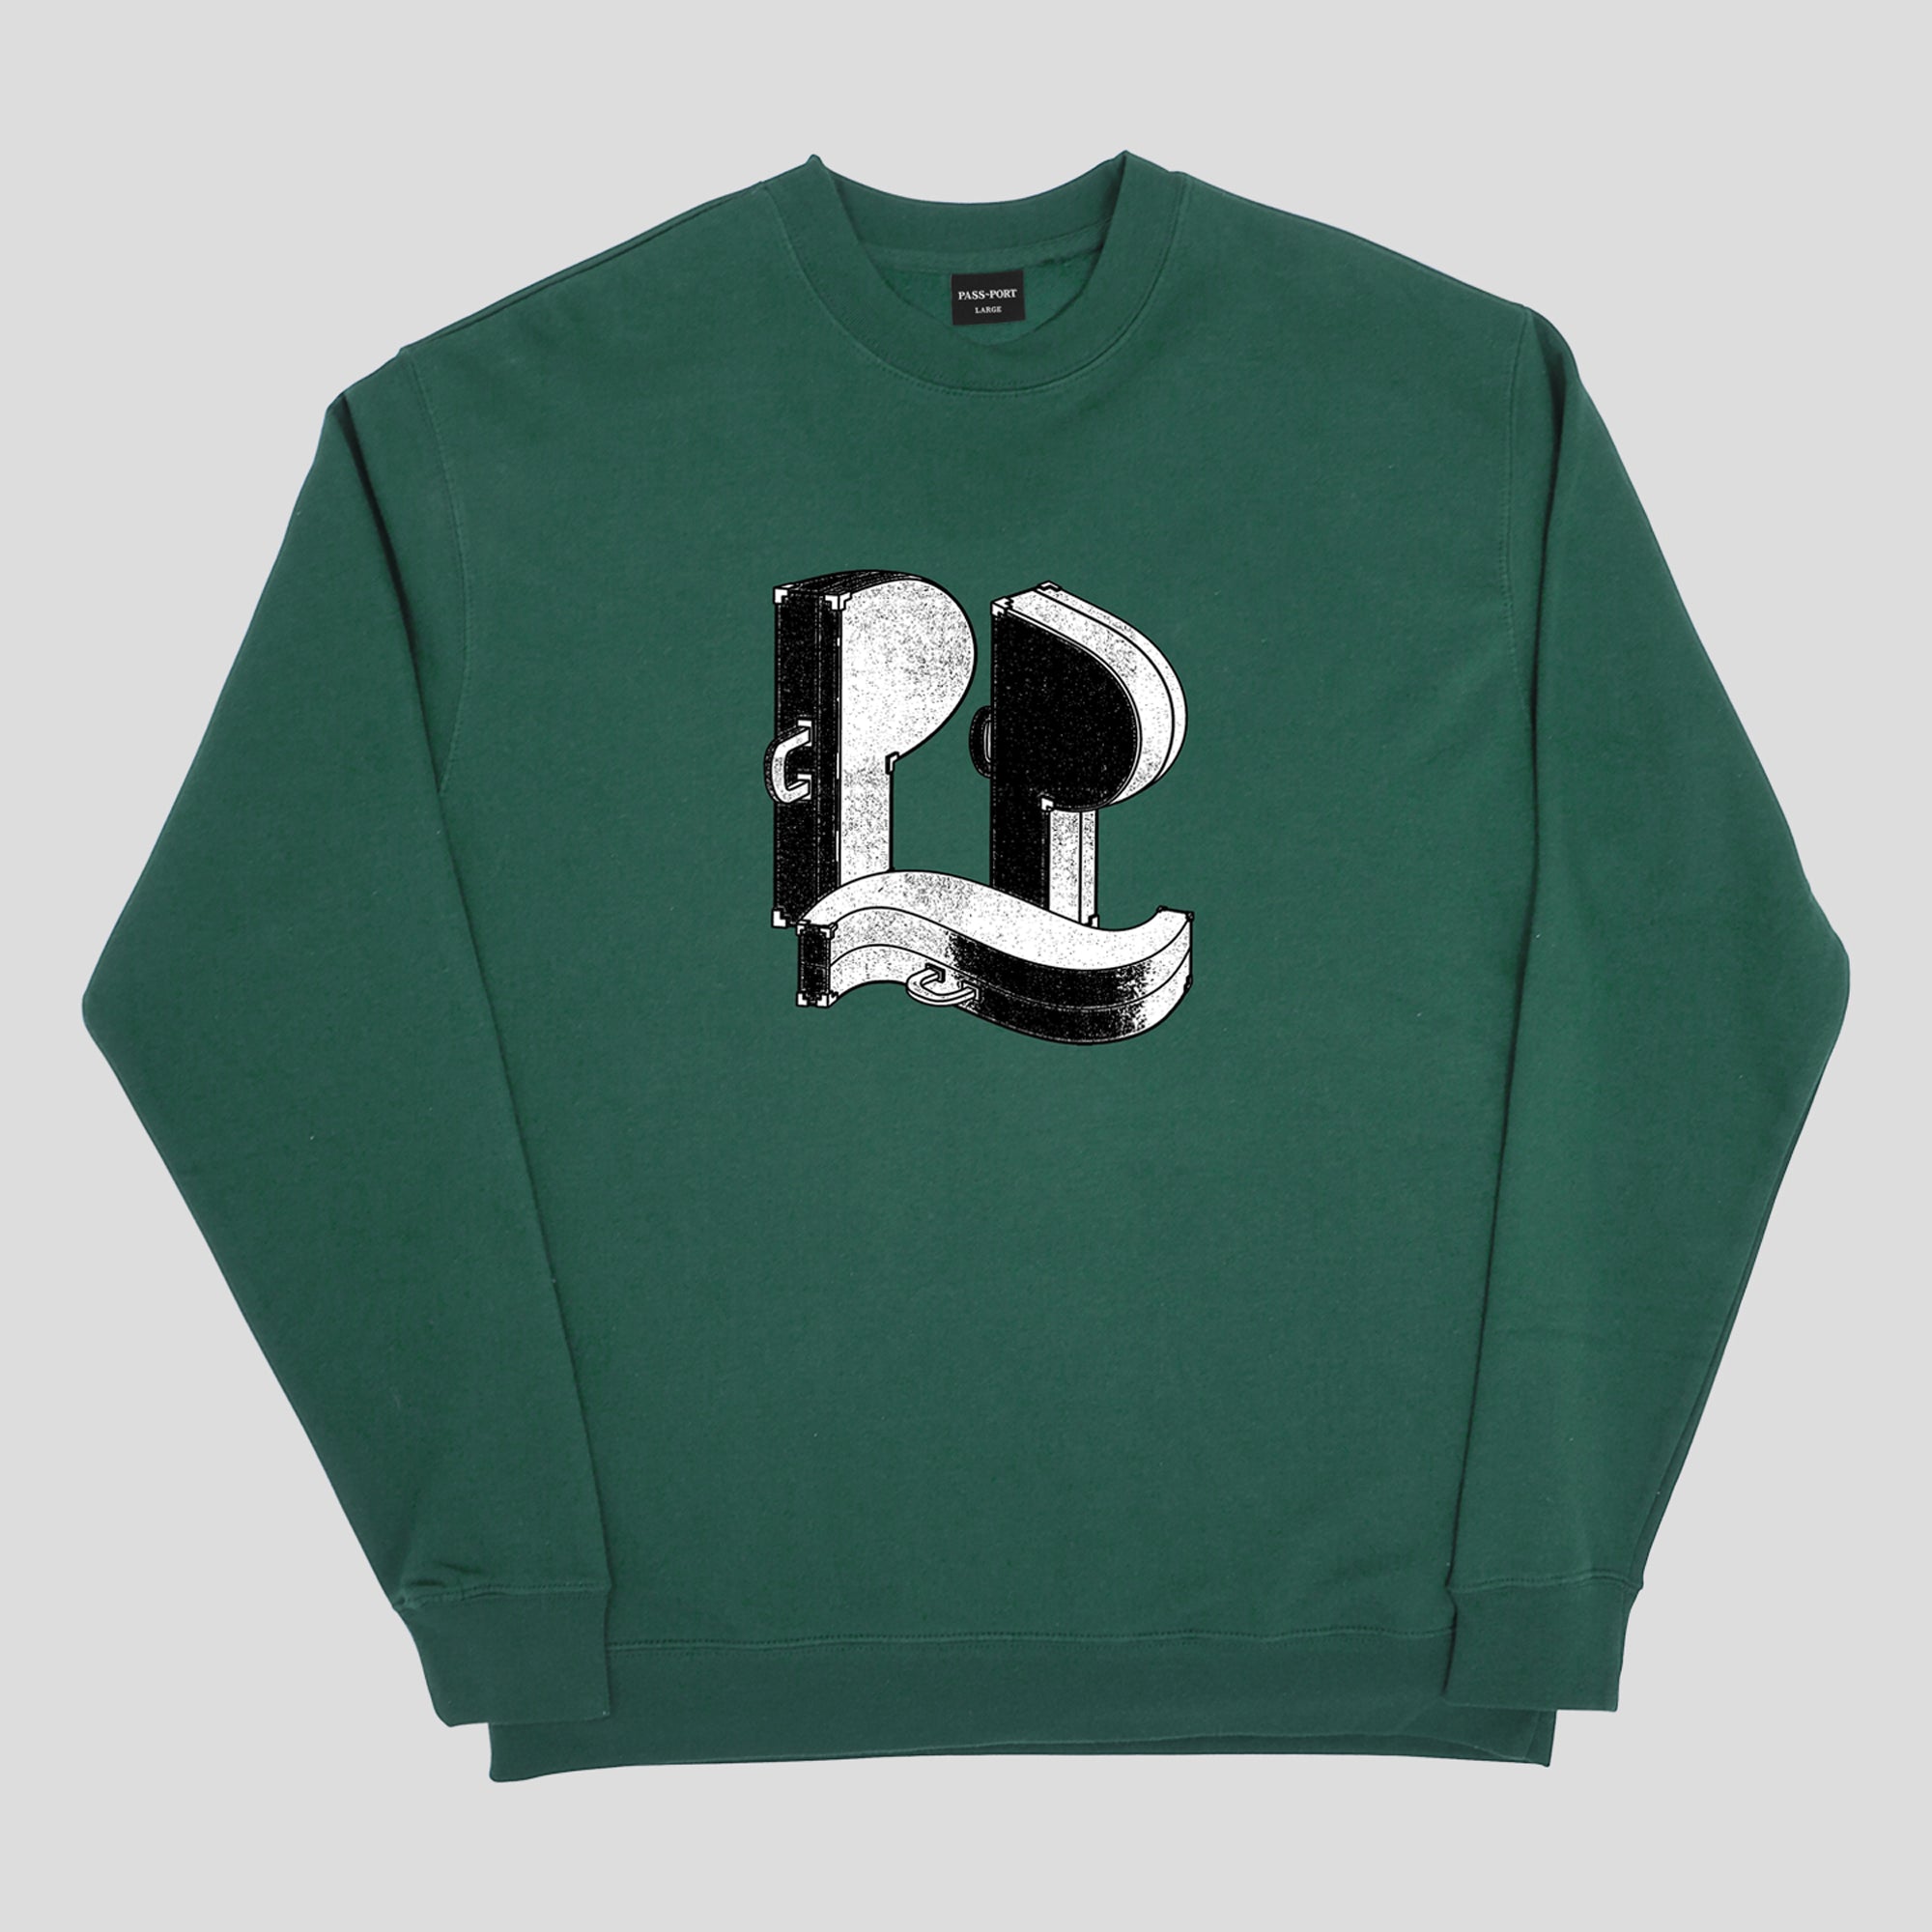 PASS~PORT "CASES" SWEATER TEAL